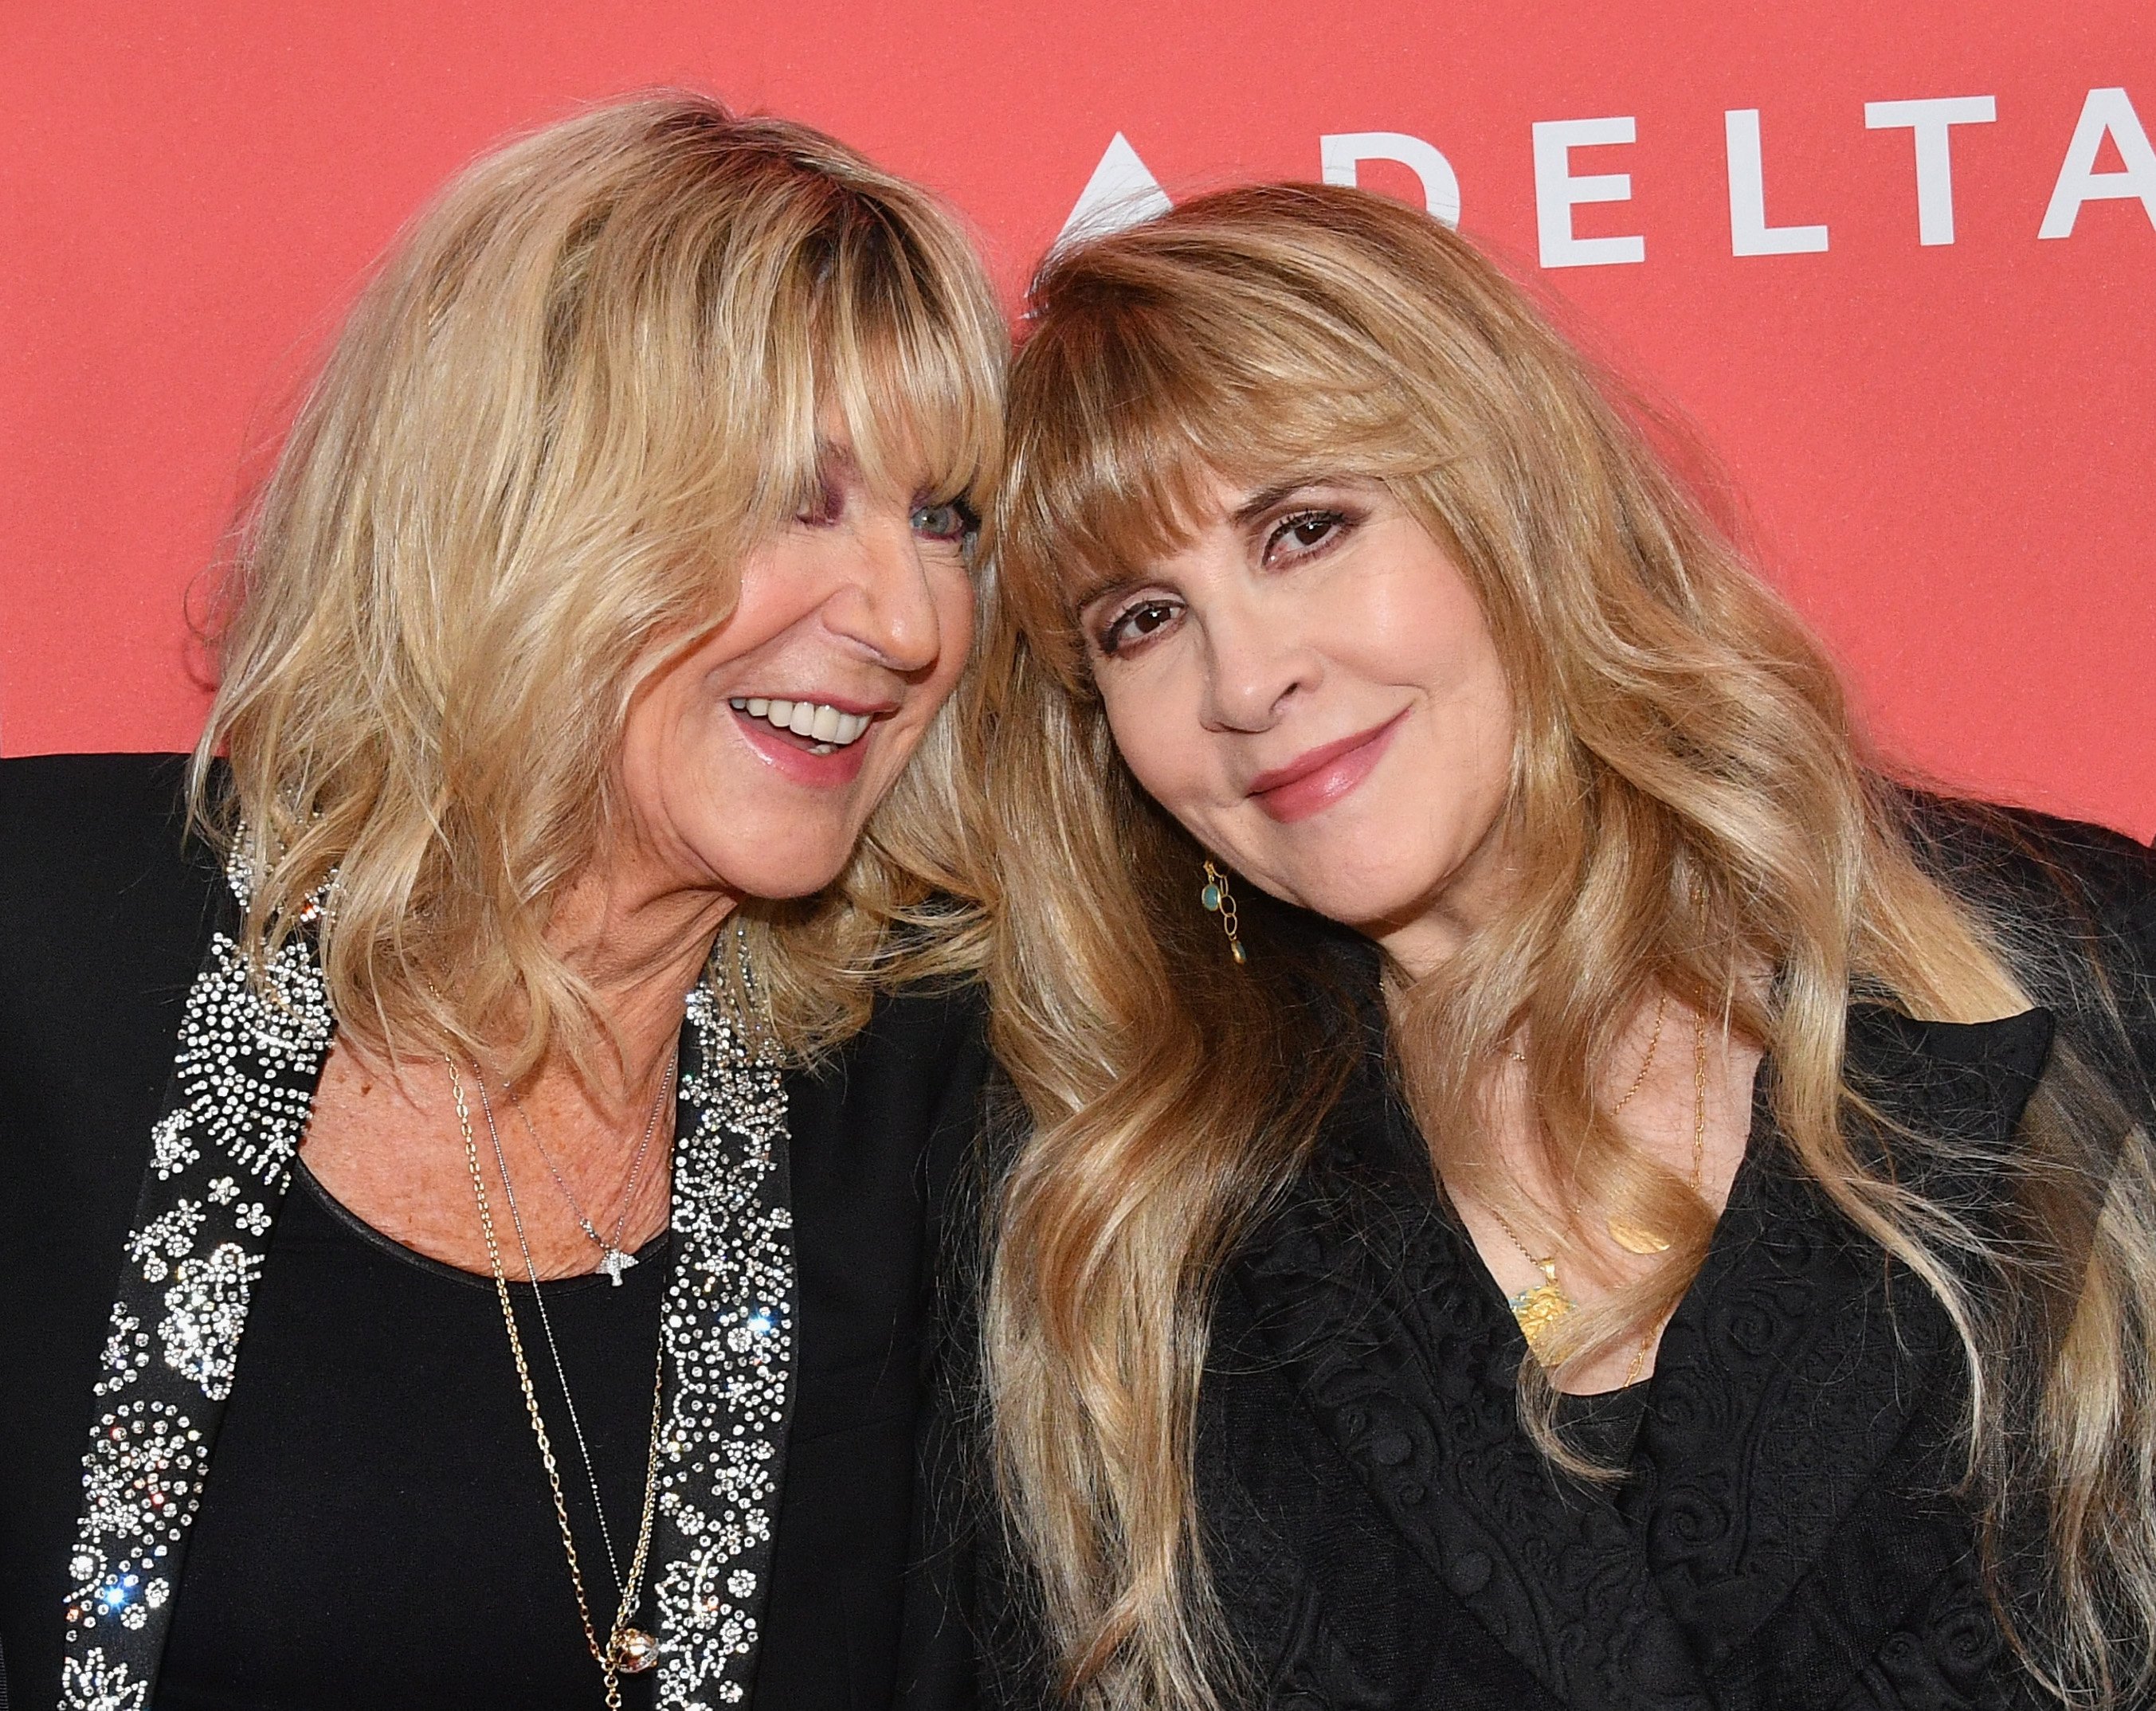 Christine McVie and Stevie Nicks wear black and pose against a red background. 